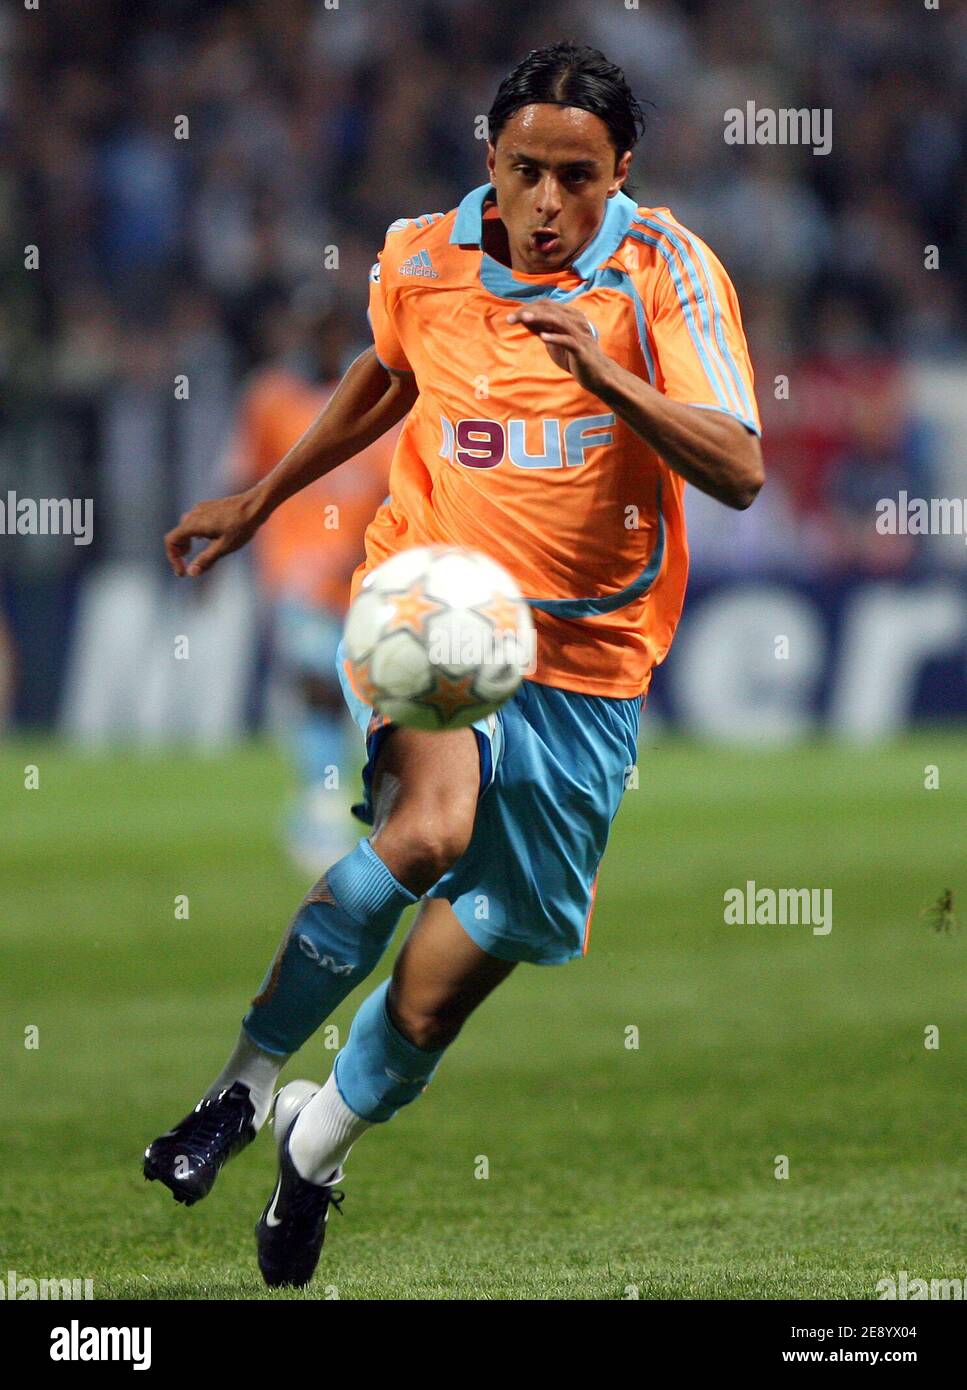 OM's Salim Arrache in action during the UEFA Champions league, Group A,  Olympique de Marseille vs Fc Porto at the Velodrome stadium in Marseille,  France on October 24, 2007. The match ended